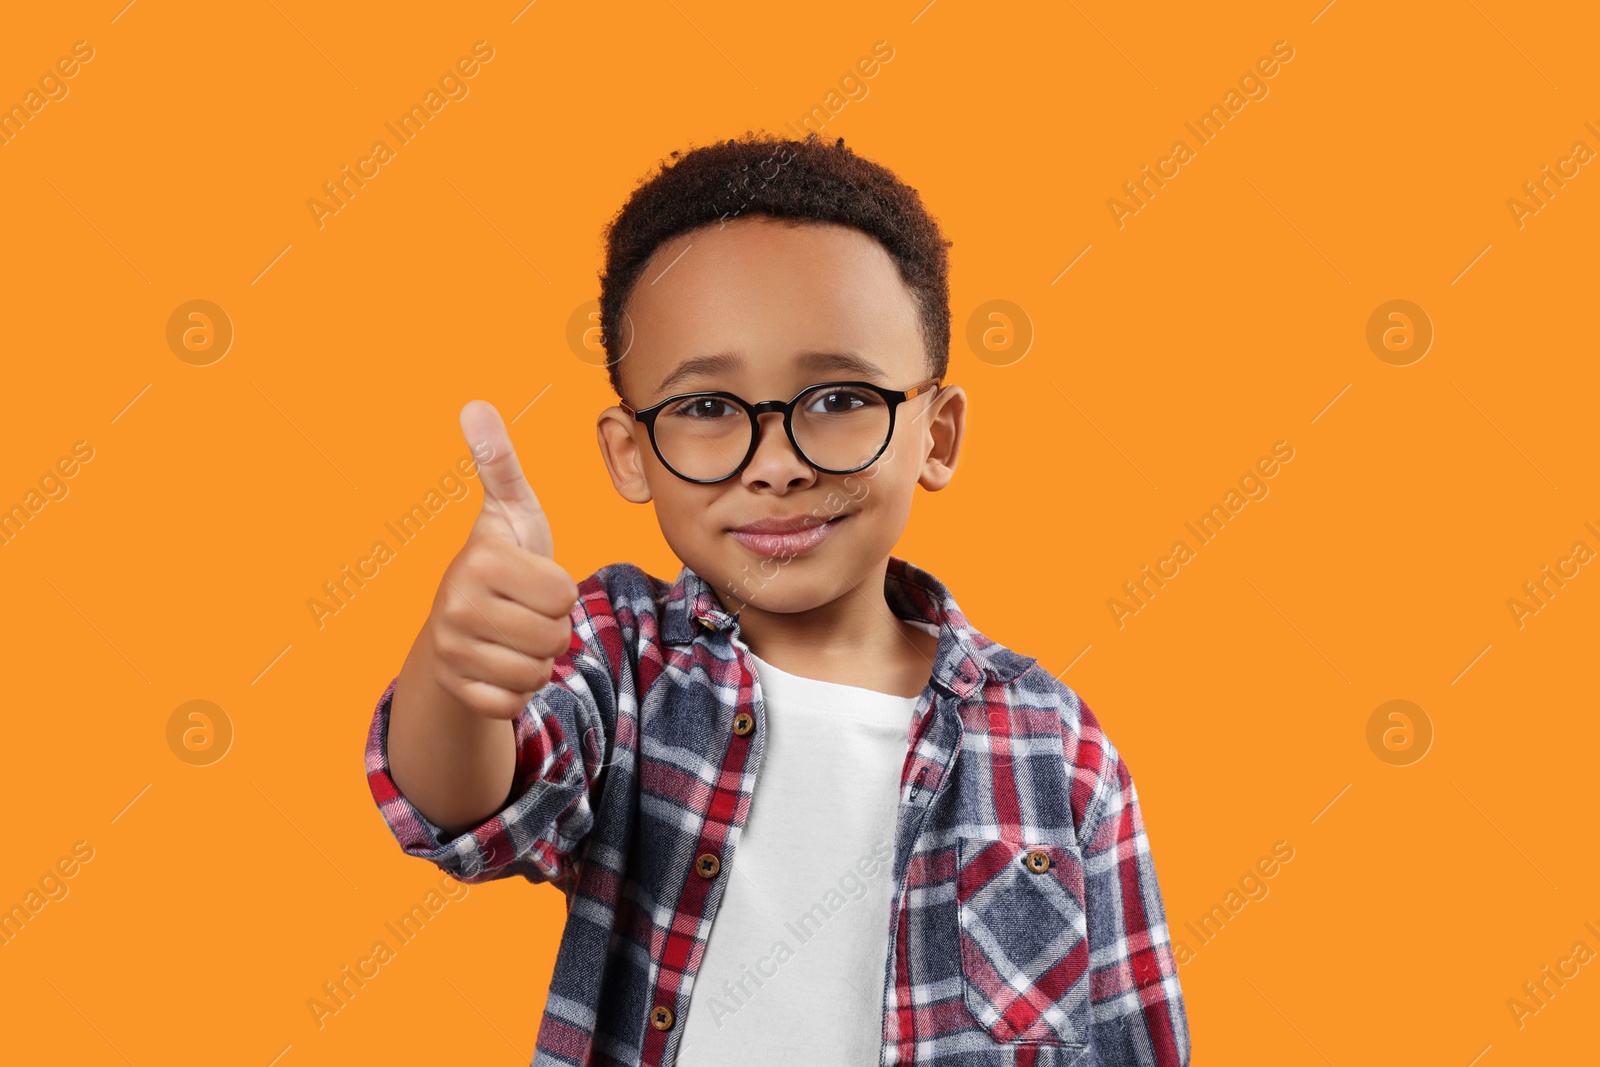 Photo of African-American boy with glasses showing thumb up on orange background